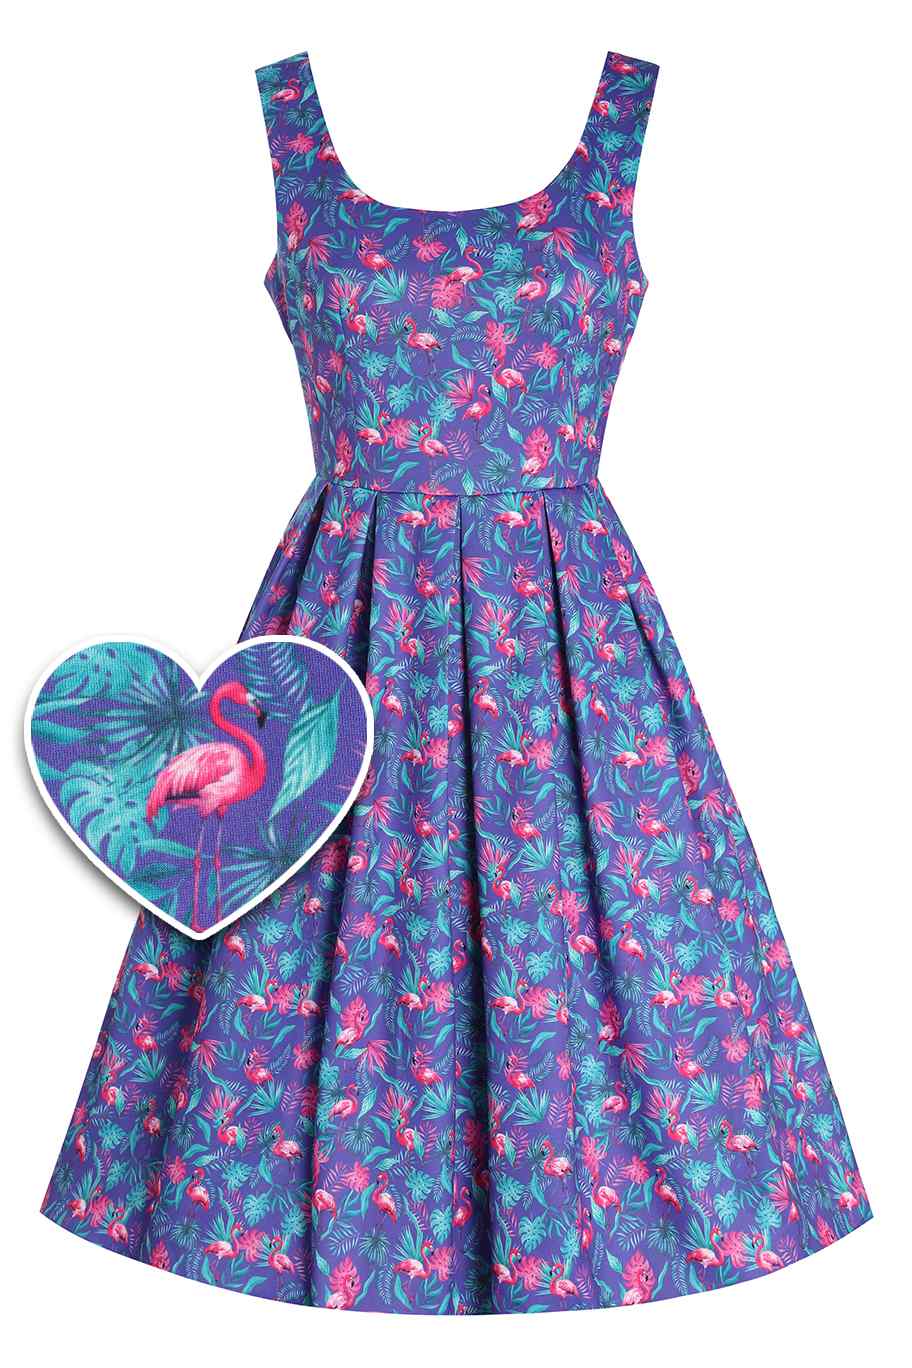 Front View of Flamingo Flared Dress in Purple